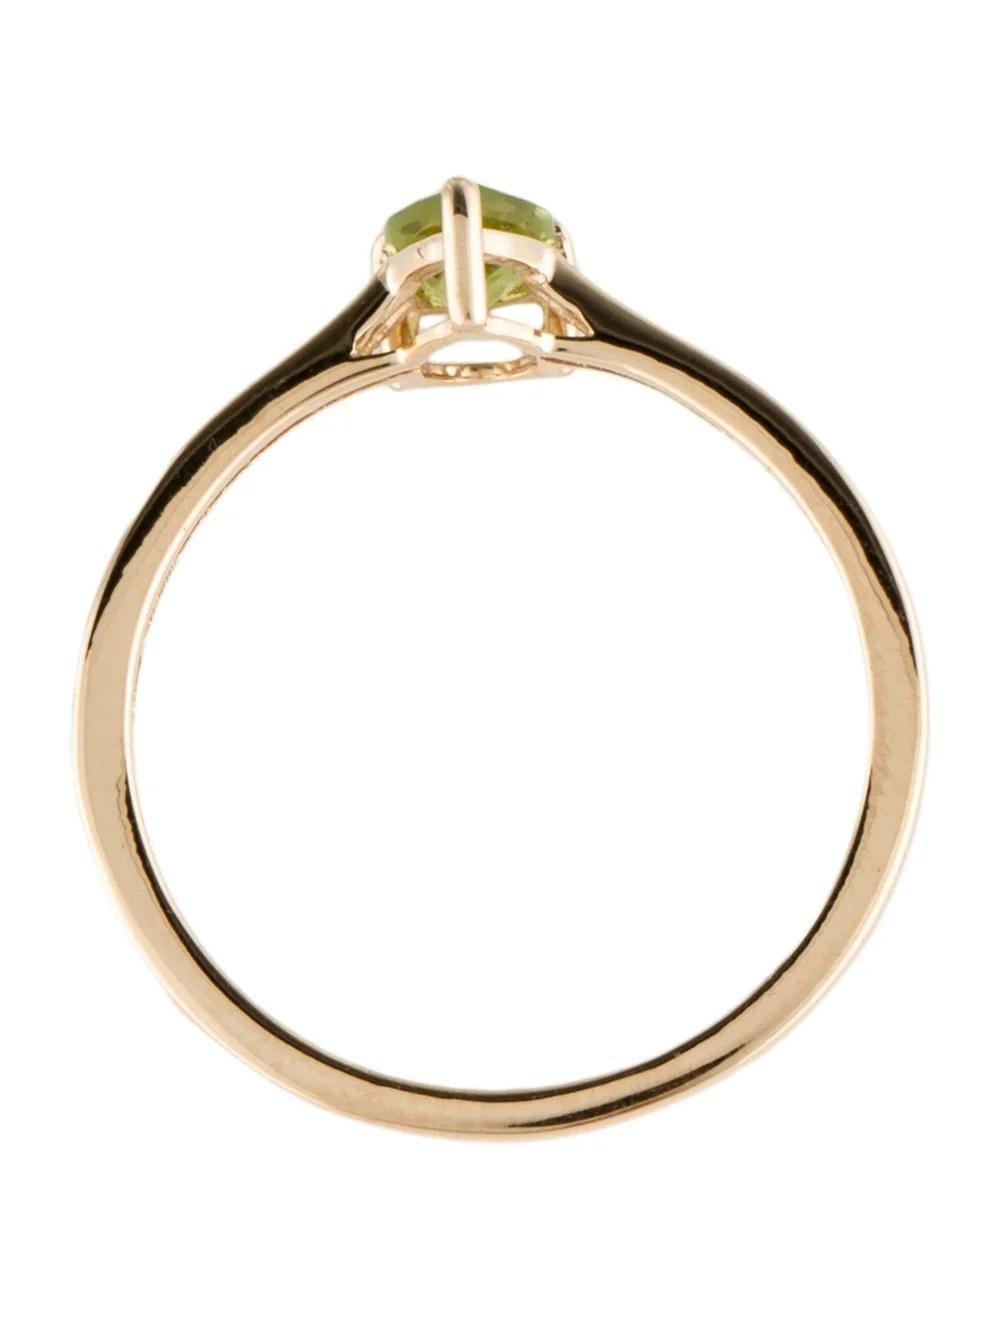 Women's 14K Peridot Cocktail Ring, Size 6.75 - Vibrant Green Gemstone, Statement Jewelry For Sale